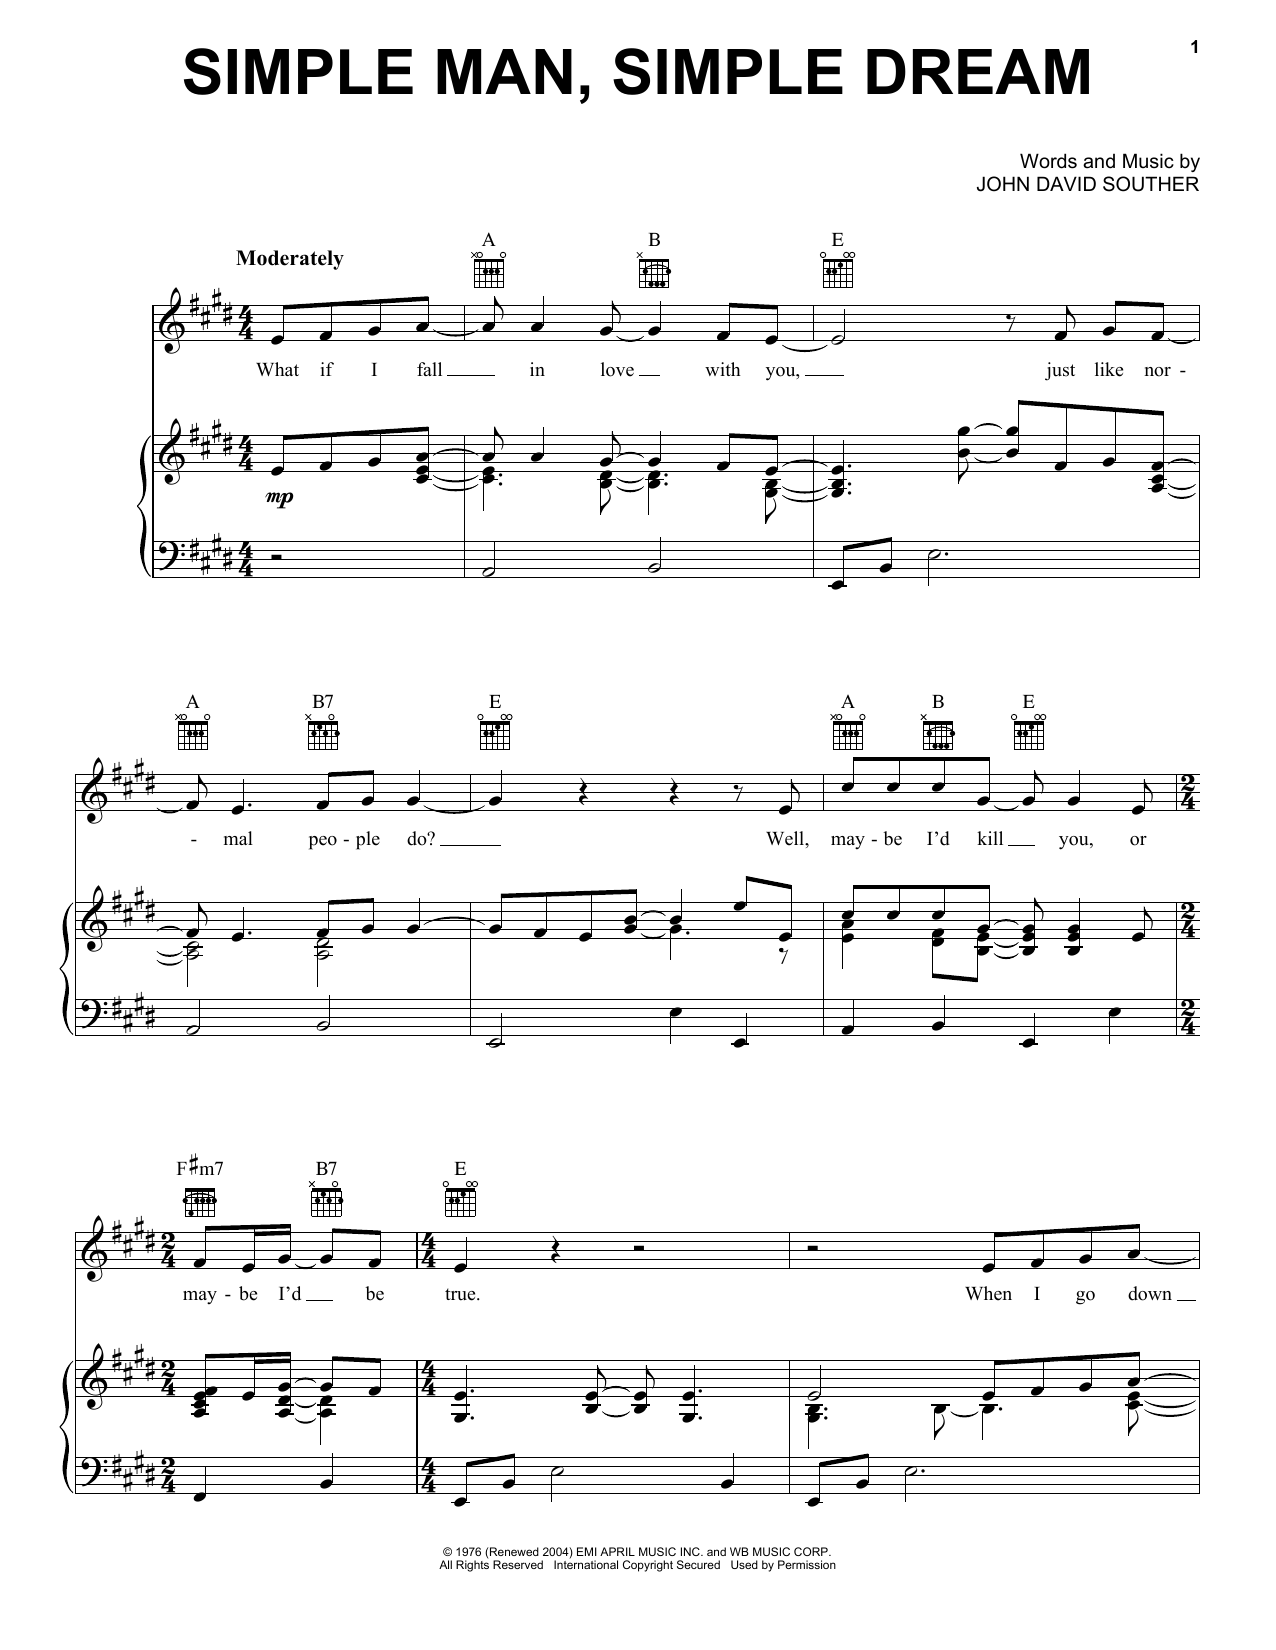 Download J.D. Souther Simple Man Simple Dream Sheet Music